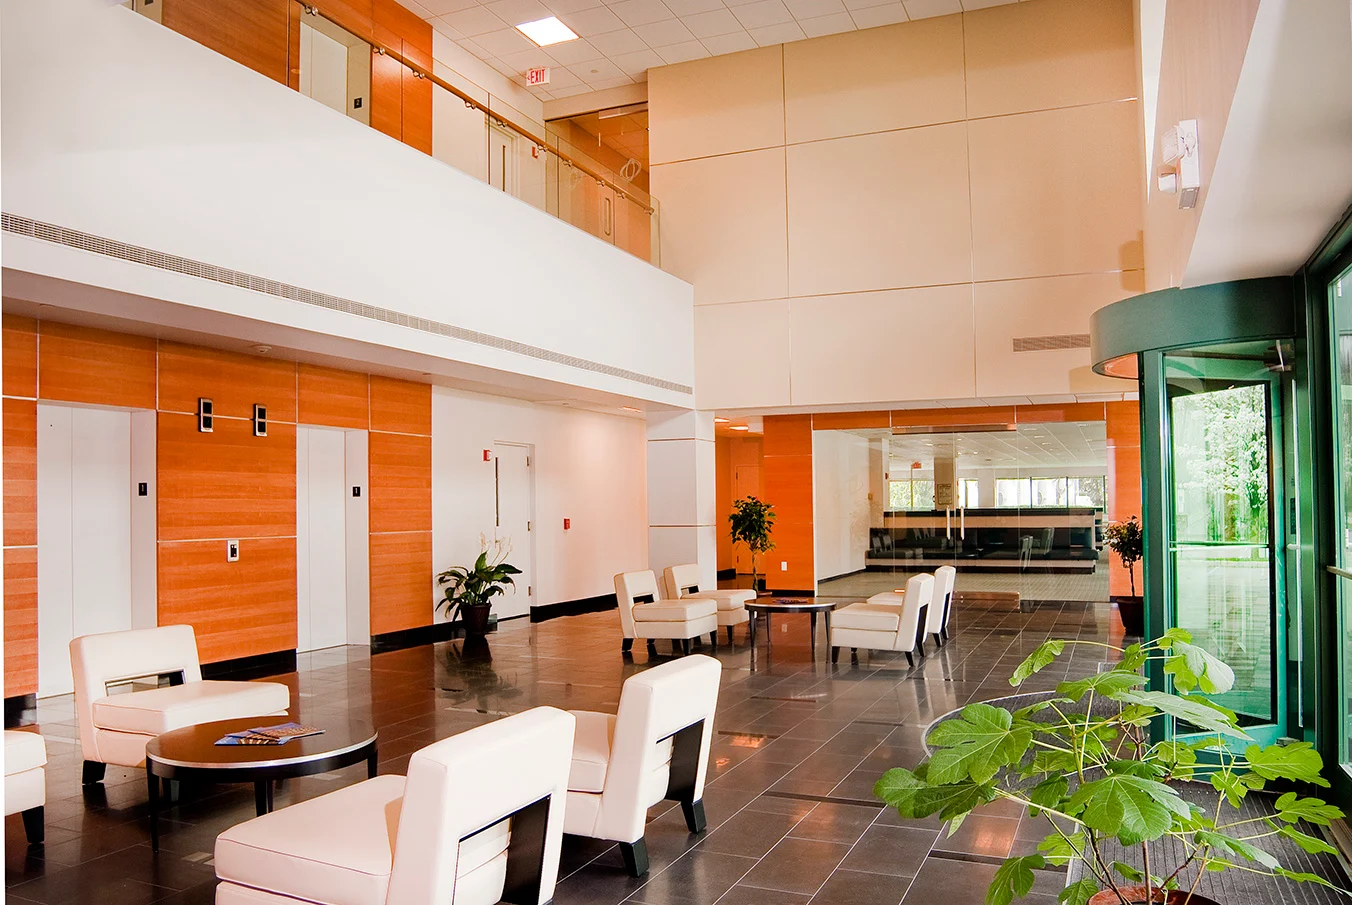 Convergence Corporate Campus – Whippany